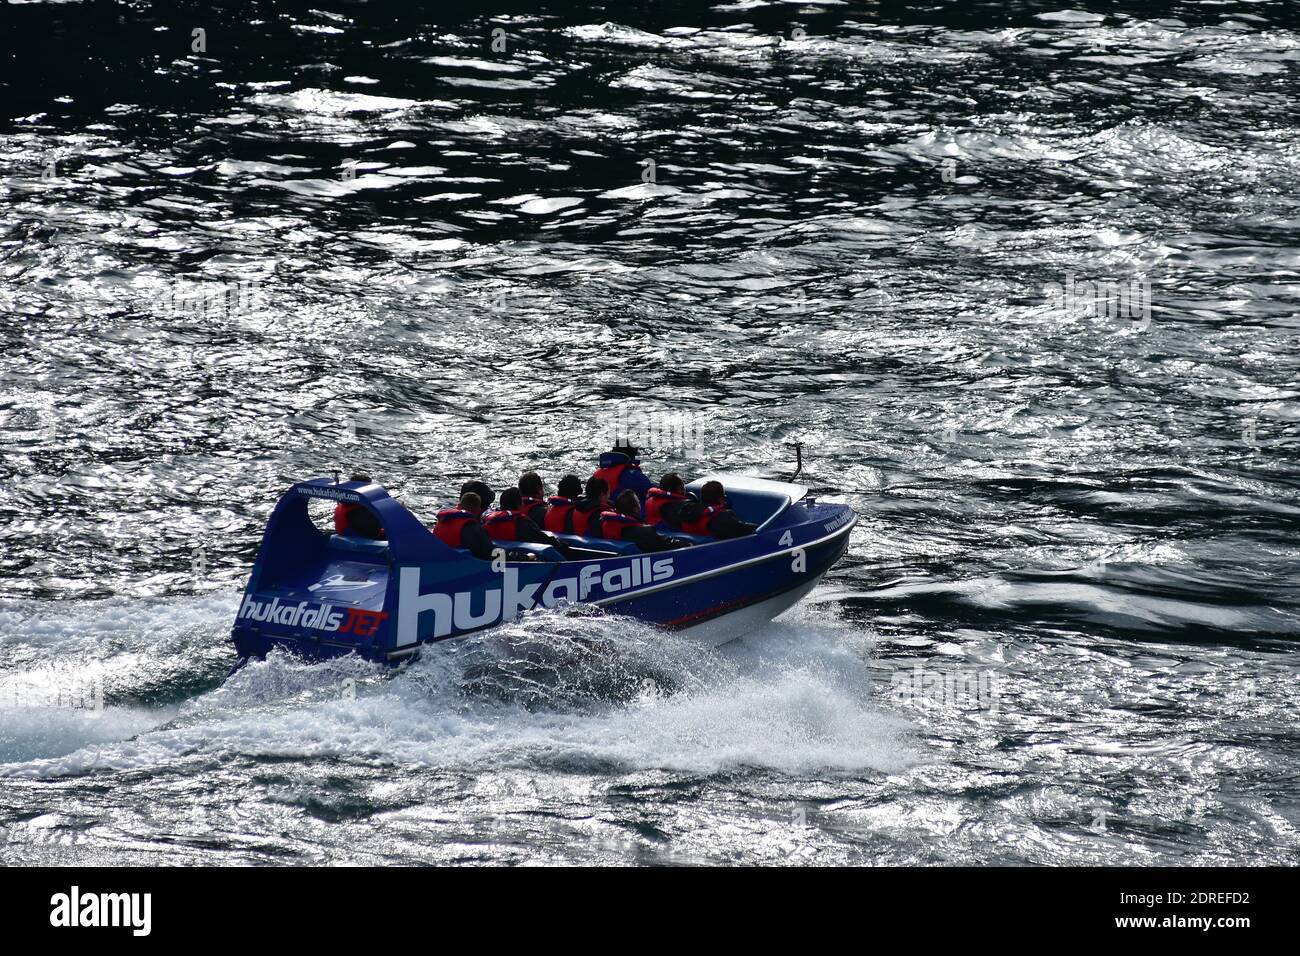 Tourist jet boat of Huka Falls taking off on white water in back light. Stock Photo